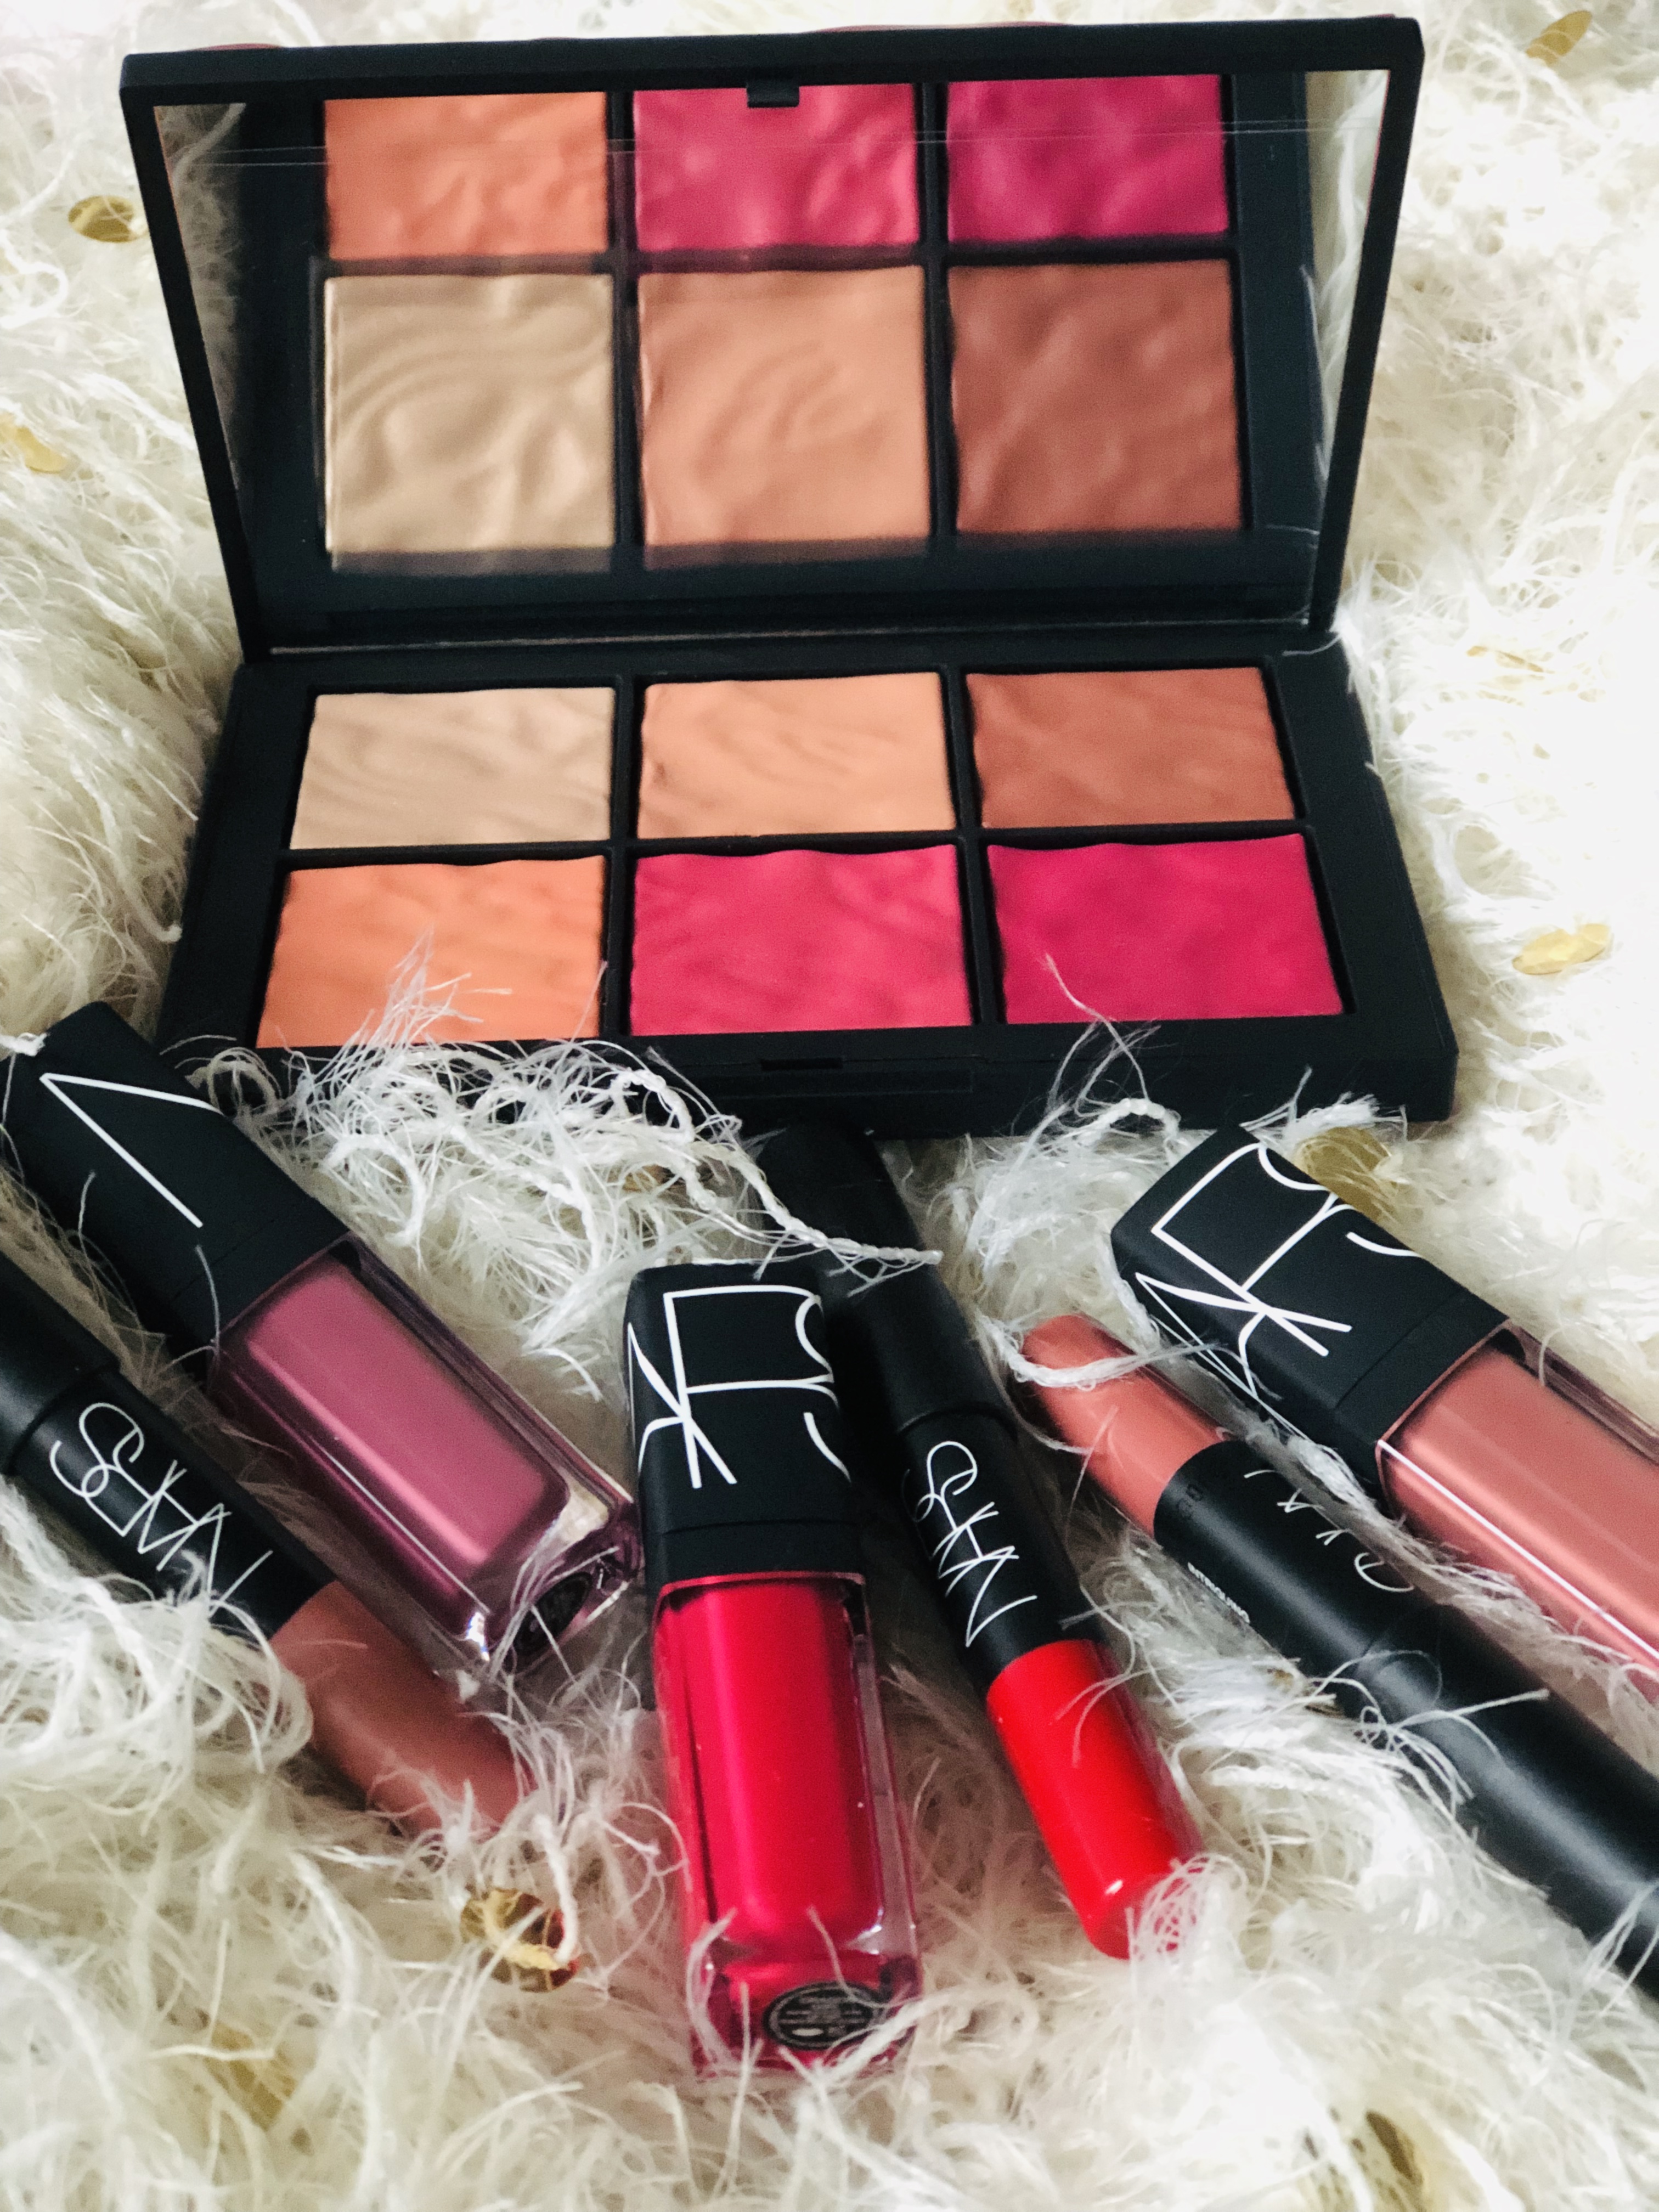 Get The Look: Nars The Exposed Collection